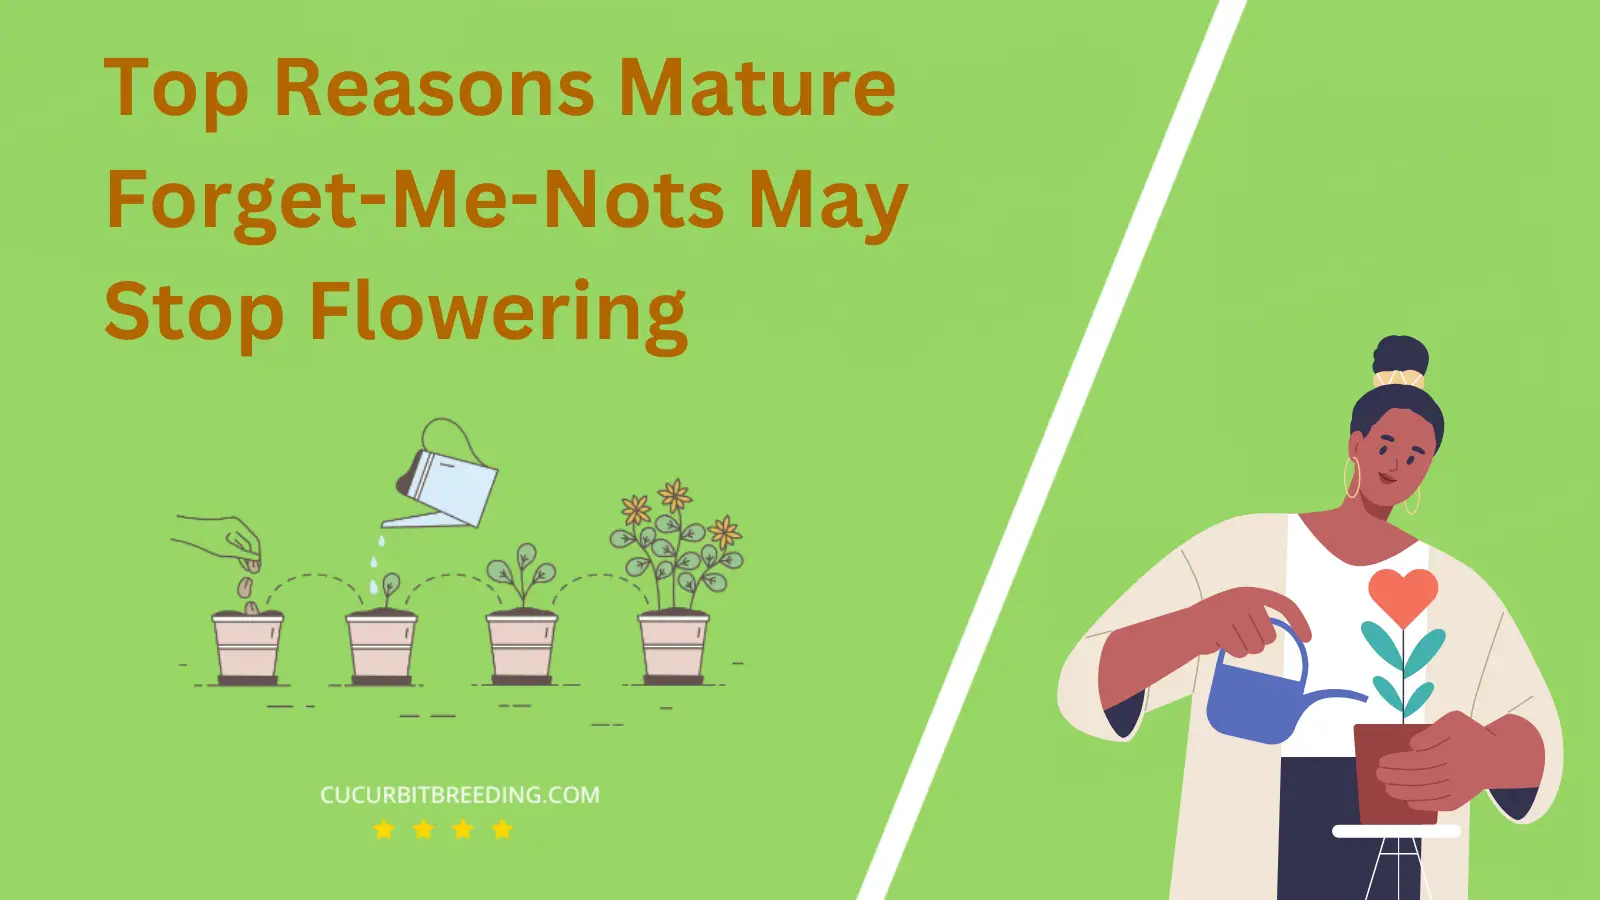 Top Reasons Mature Forget-Me-Nots May Stop Flowering